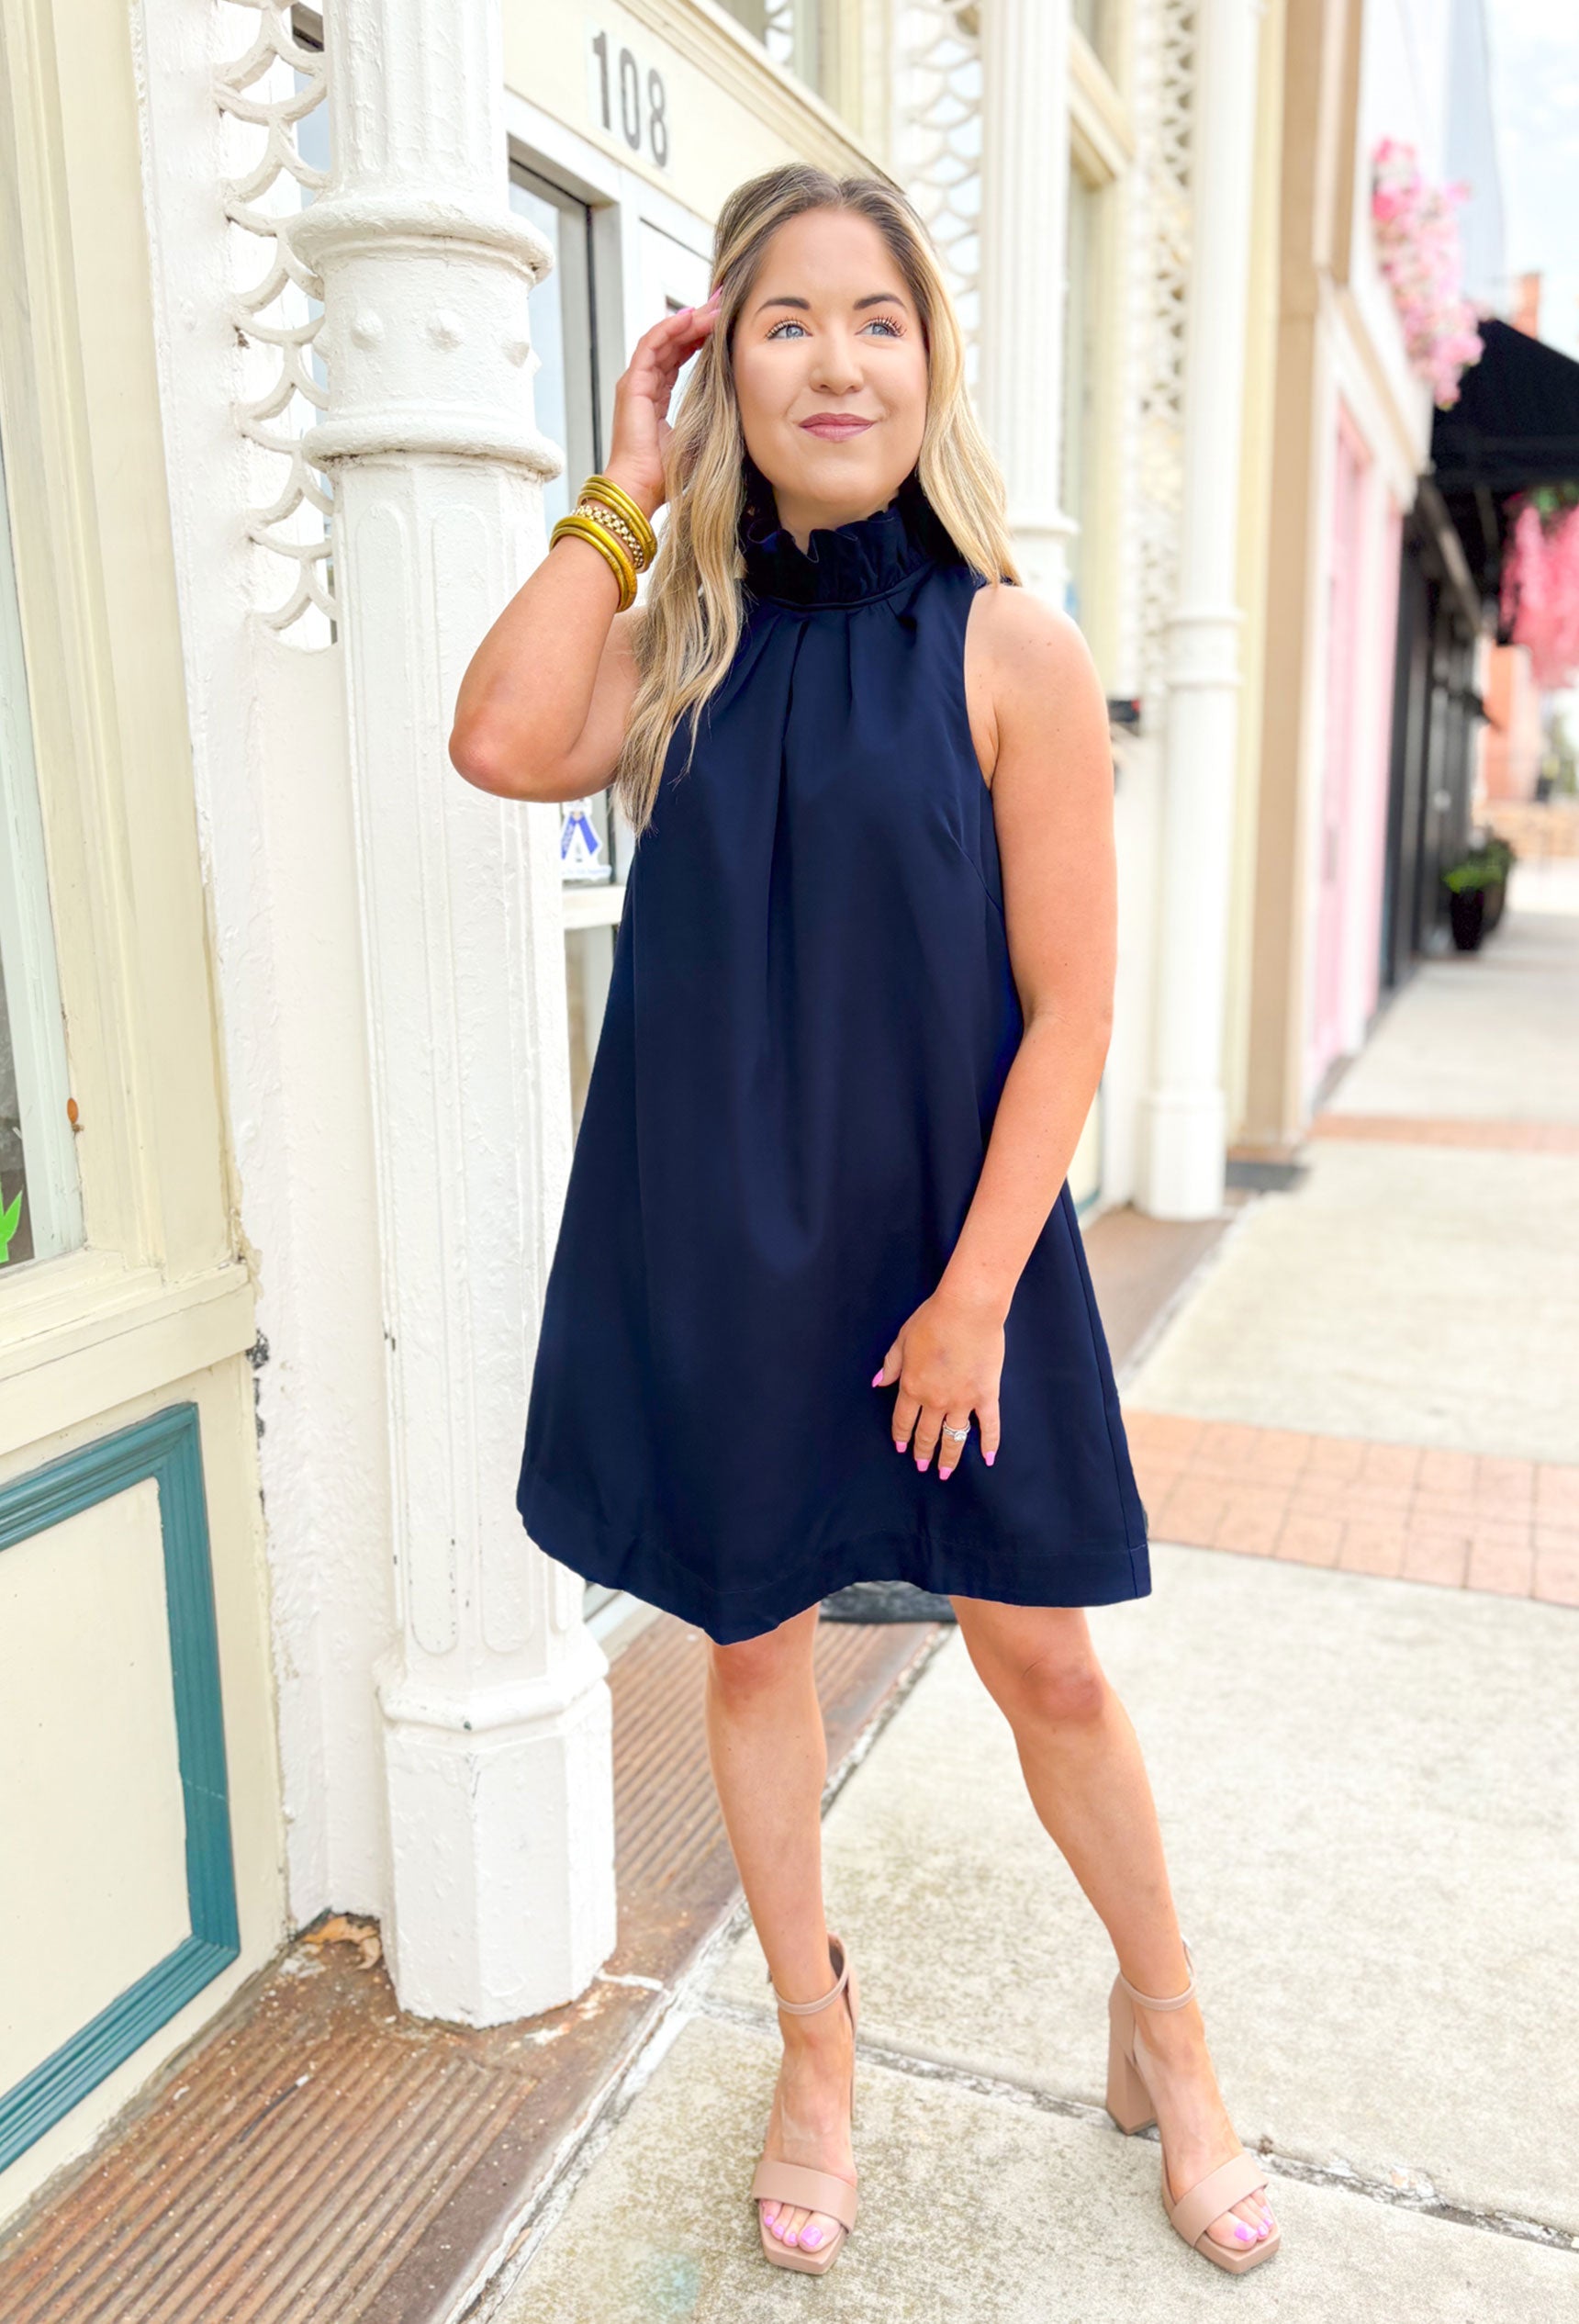 Capri Calling Dress in Navy, Navy sleeveless high neck dress, ruffling around the neck, bow detail on the back of the neck that drapes down the back